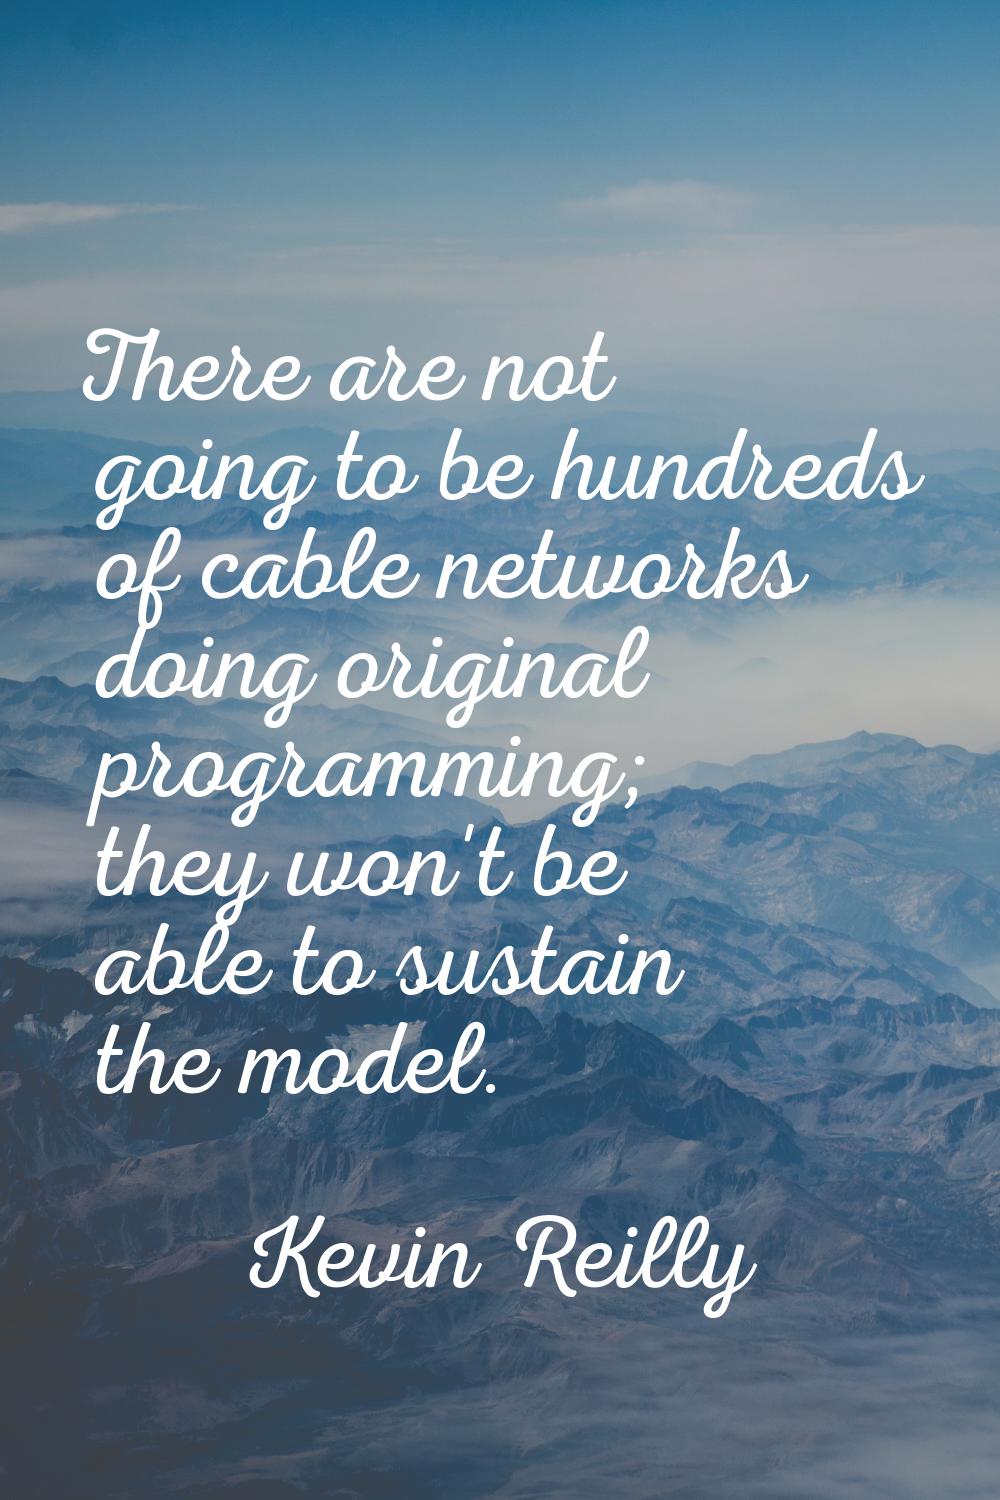 There are not going to be hundreds of cable networks doing original programming; they won't be able